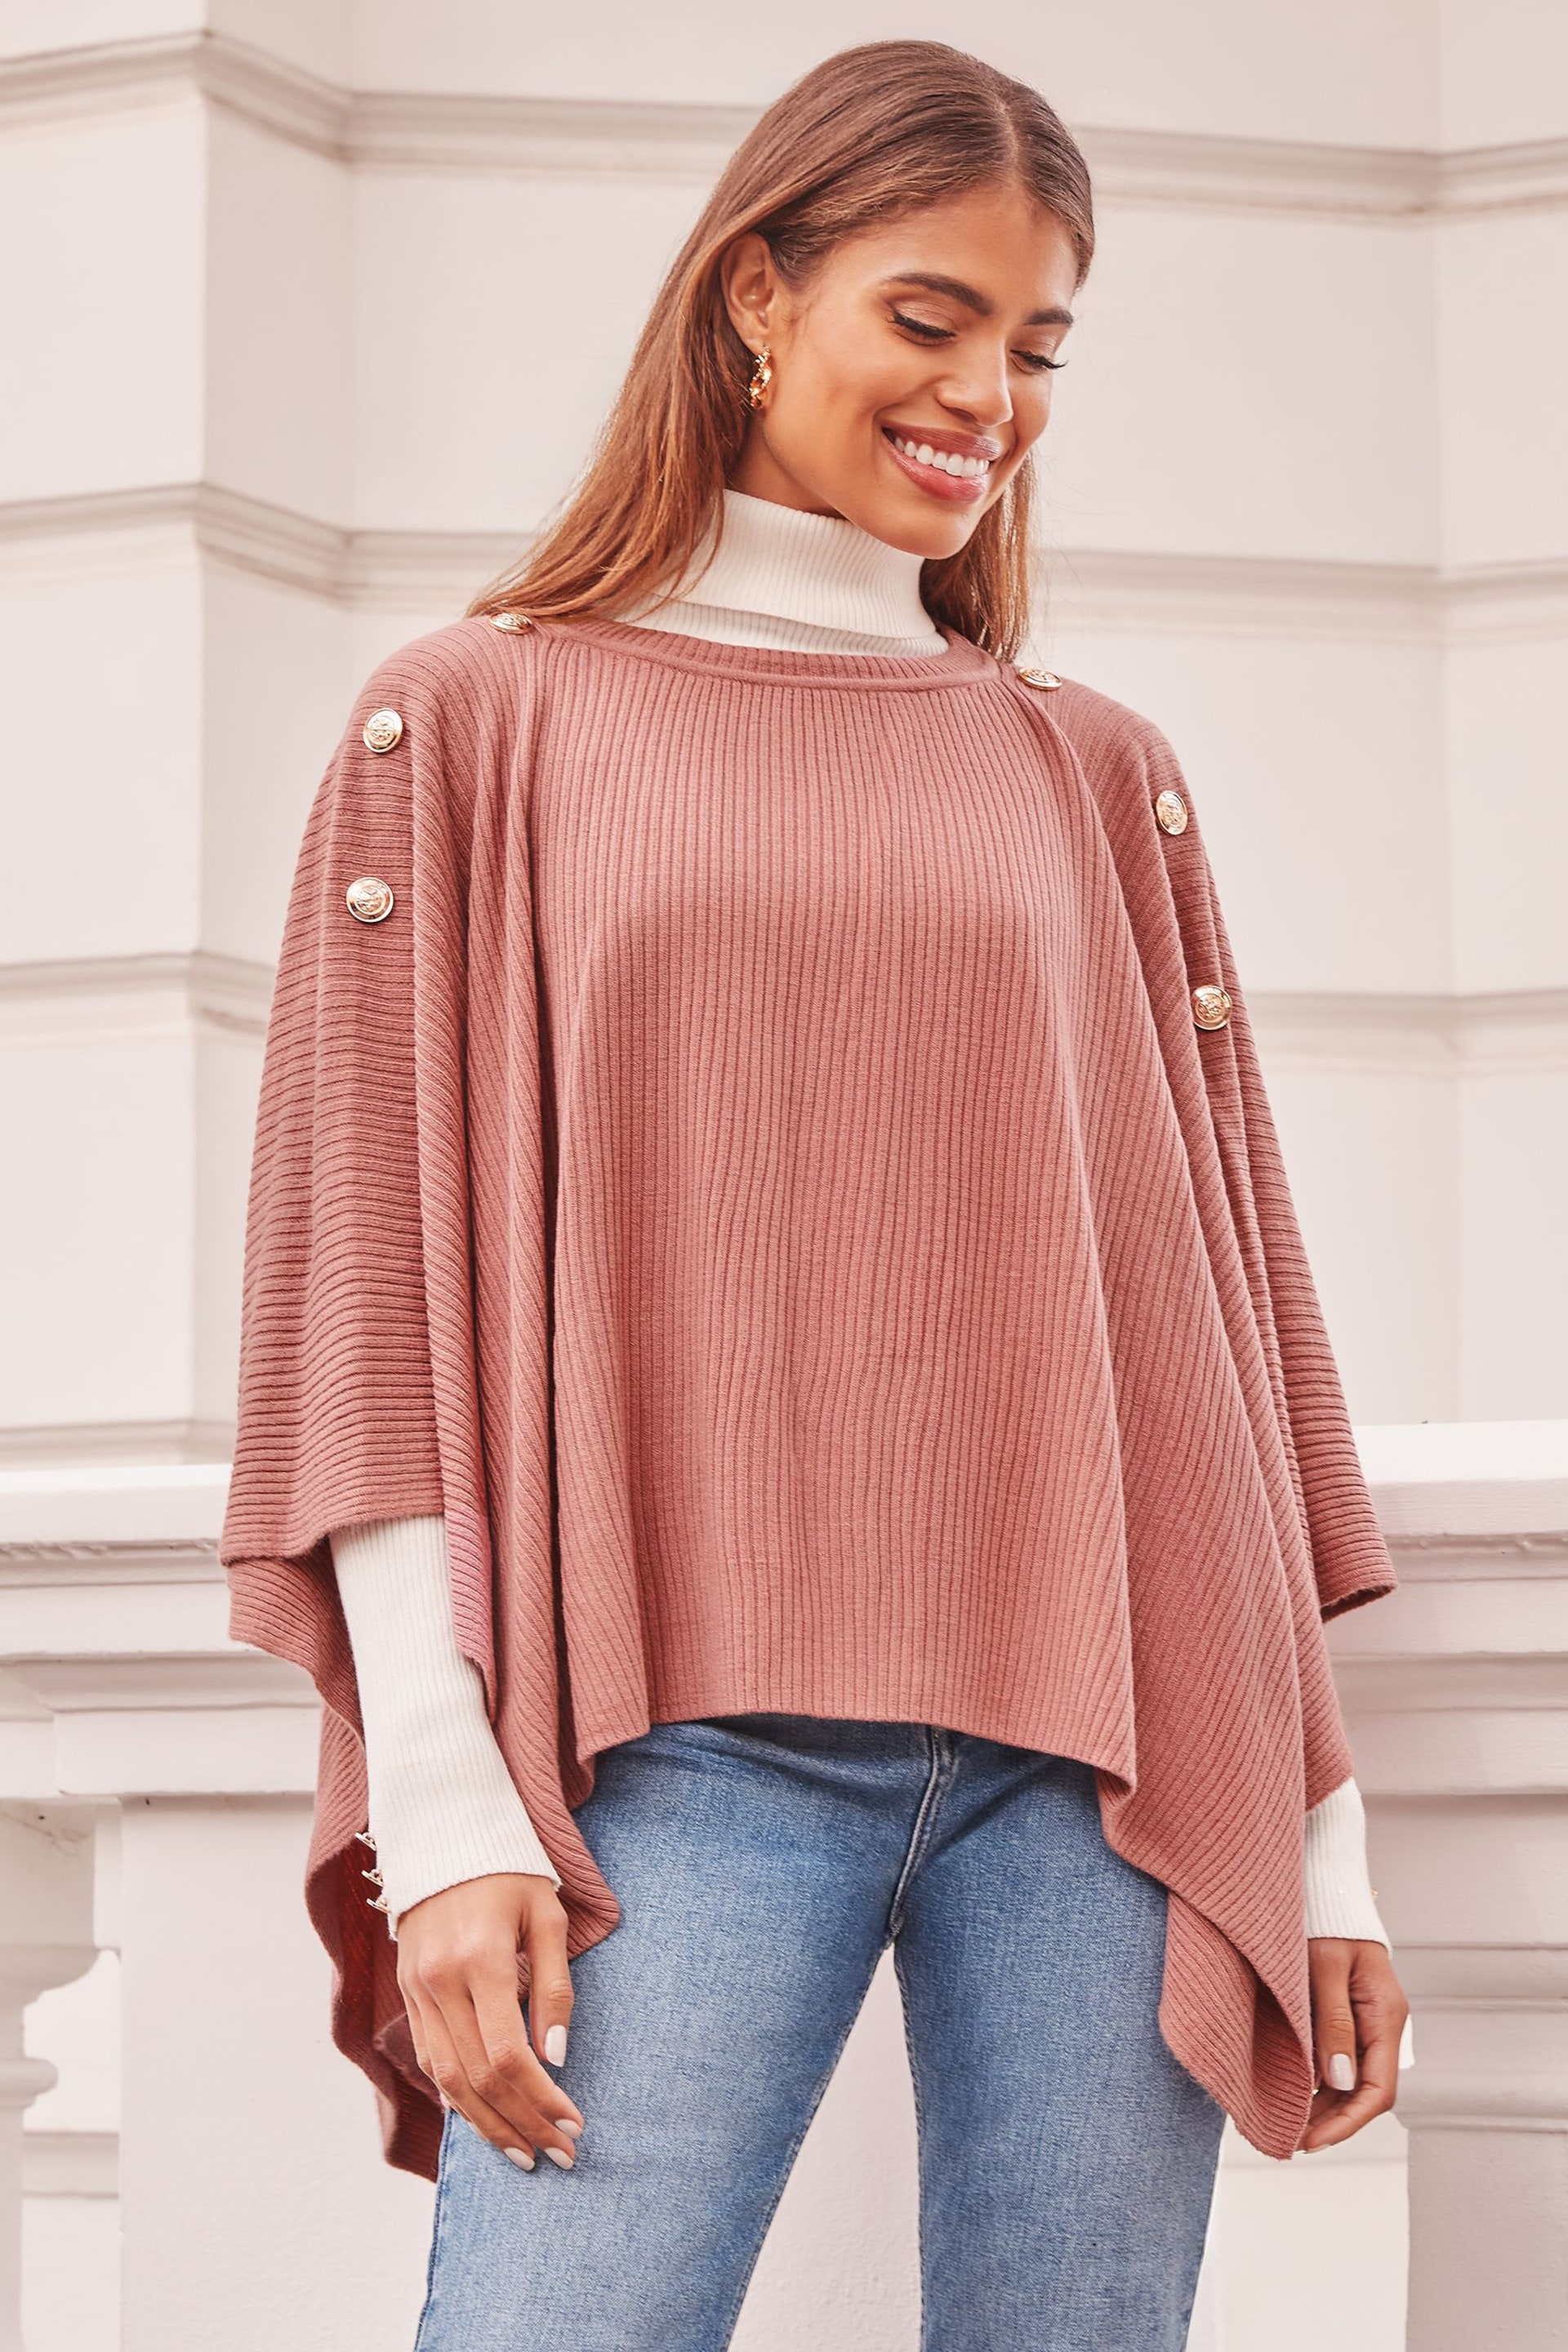 Lipsy Pink Military Button Shoulder Knit Poncho - Image 2 of 3